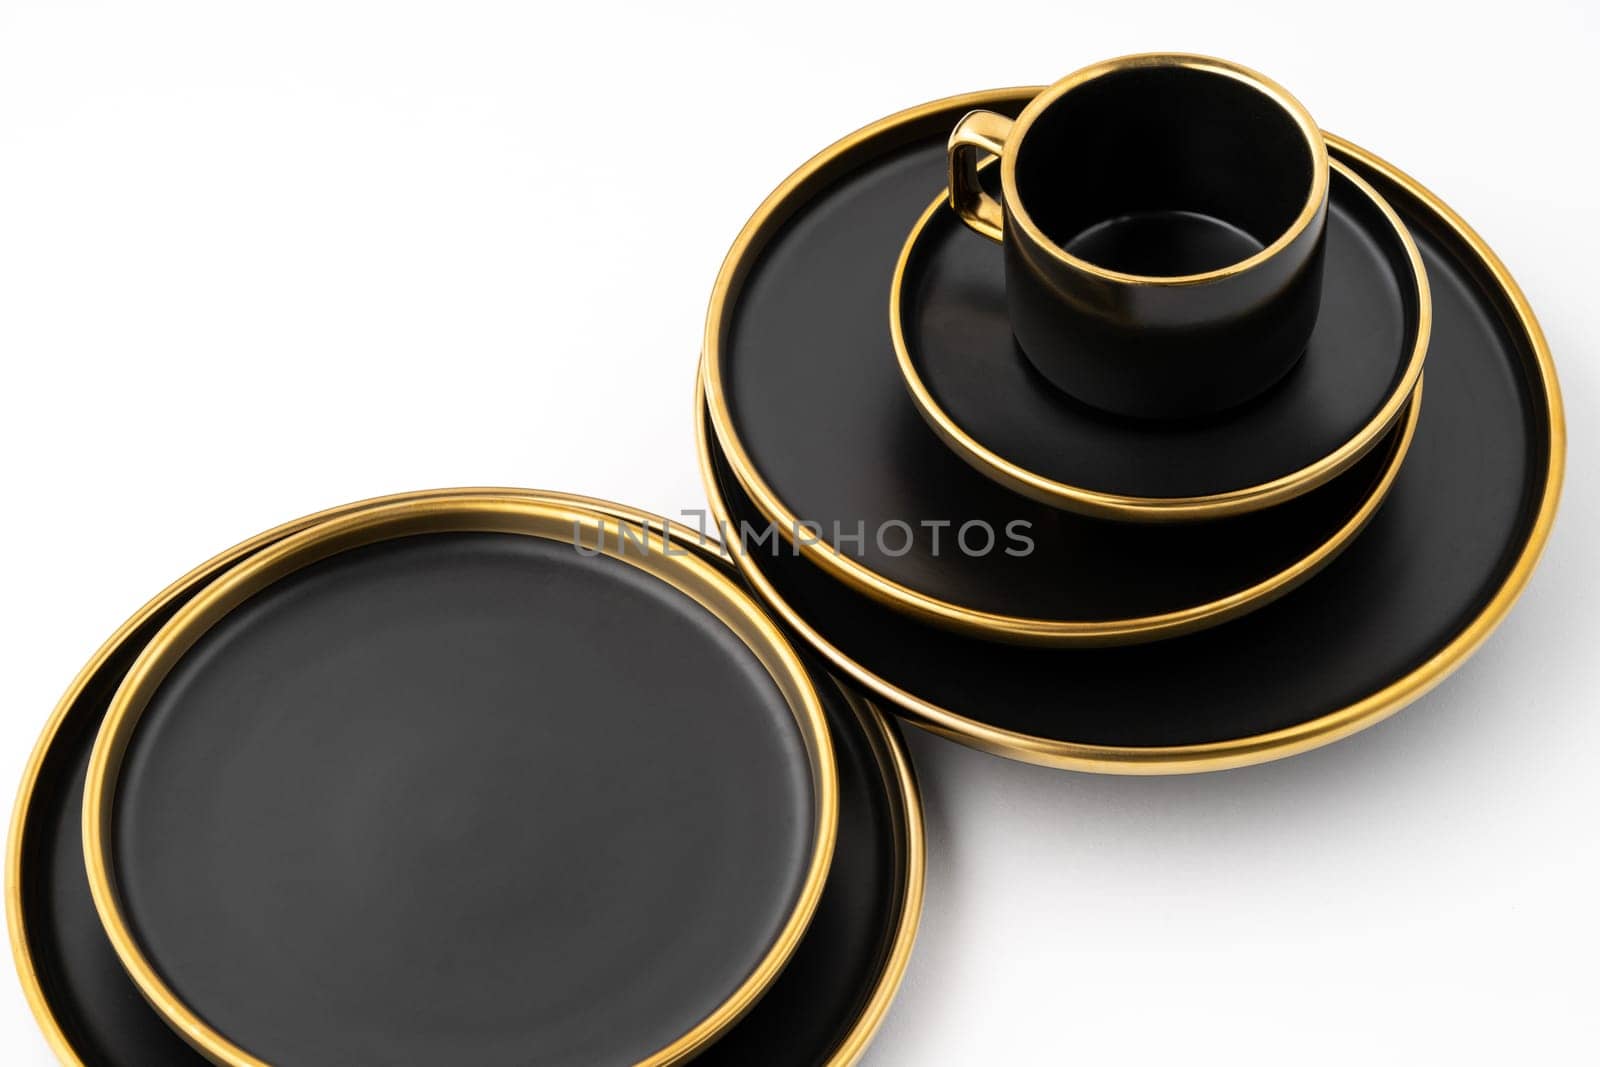 A set of black and golden ceramic plates and cup on a white background by A_Karim